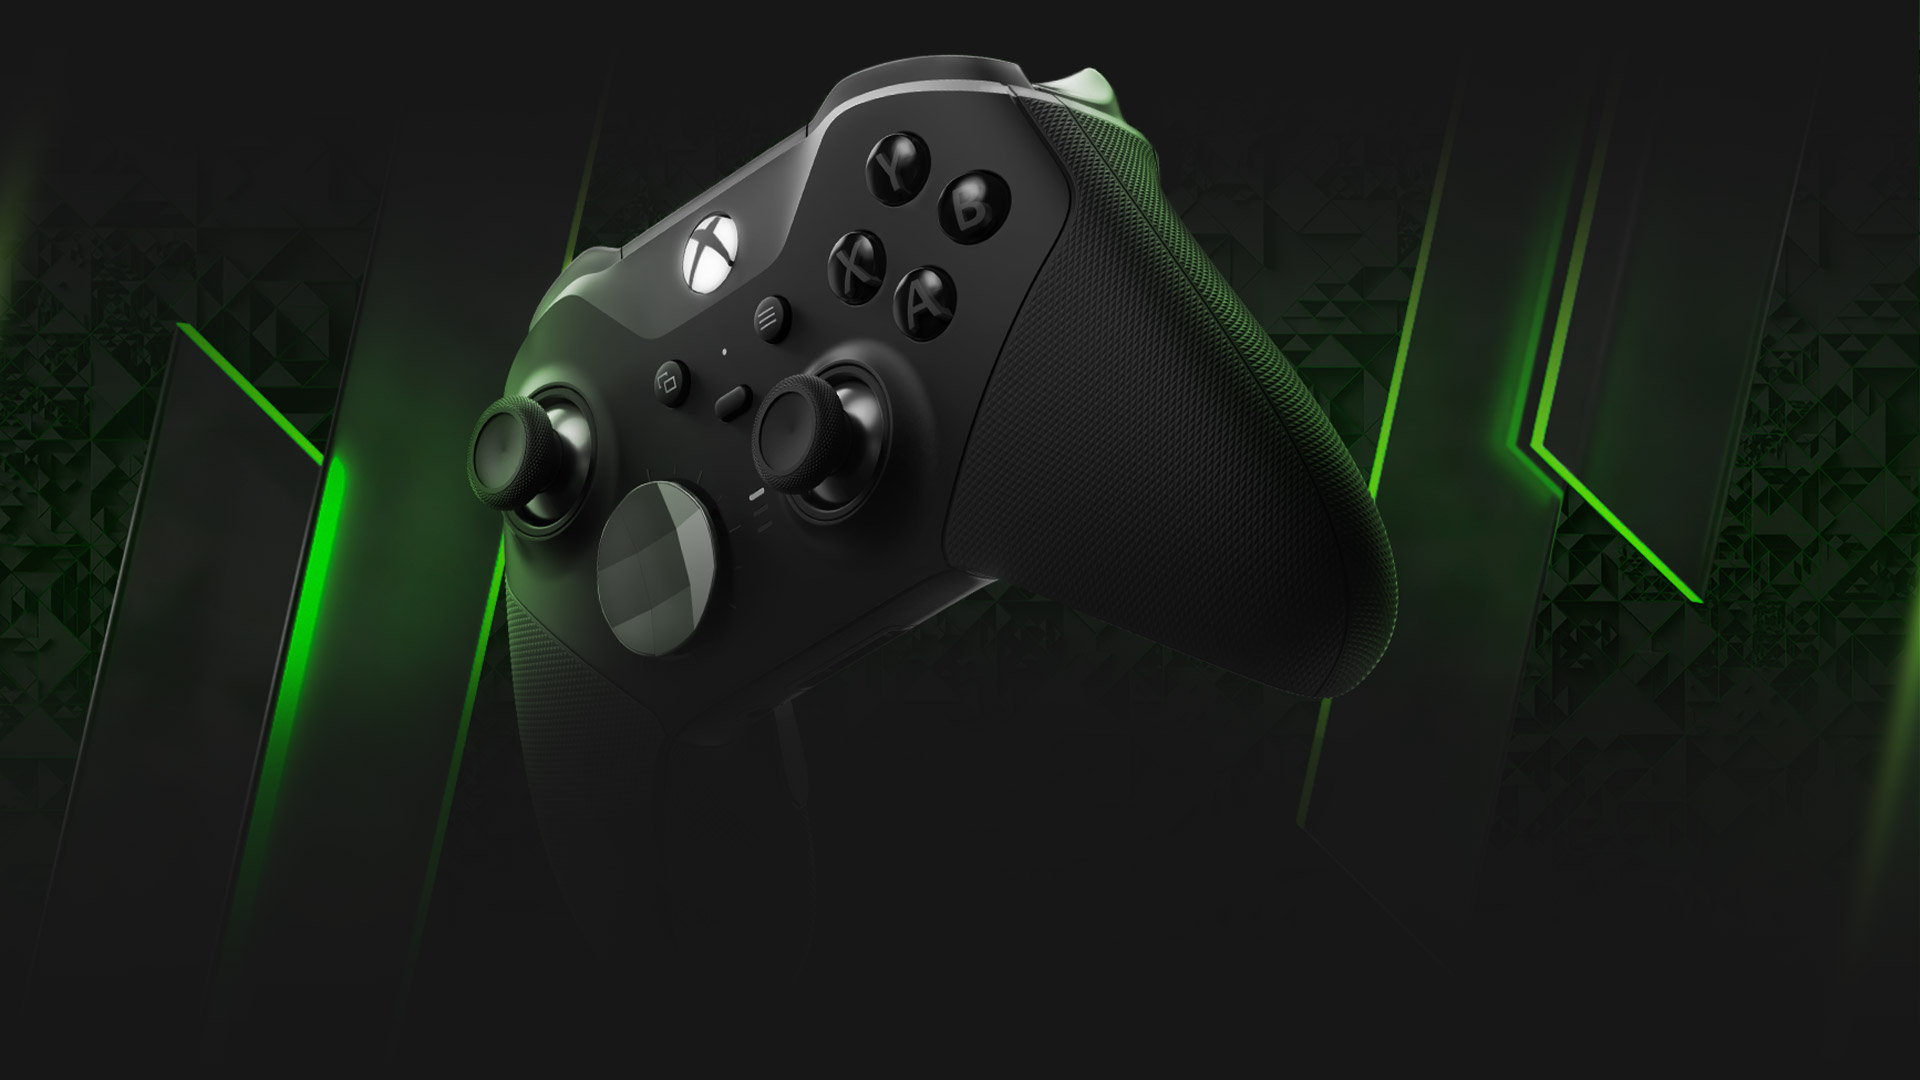 Xbox Elite Wireless Controller Series 2 in front of a green and black patterned background.